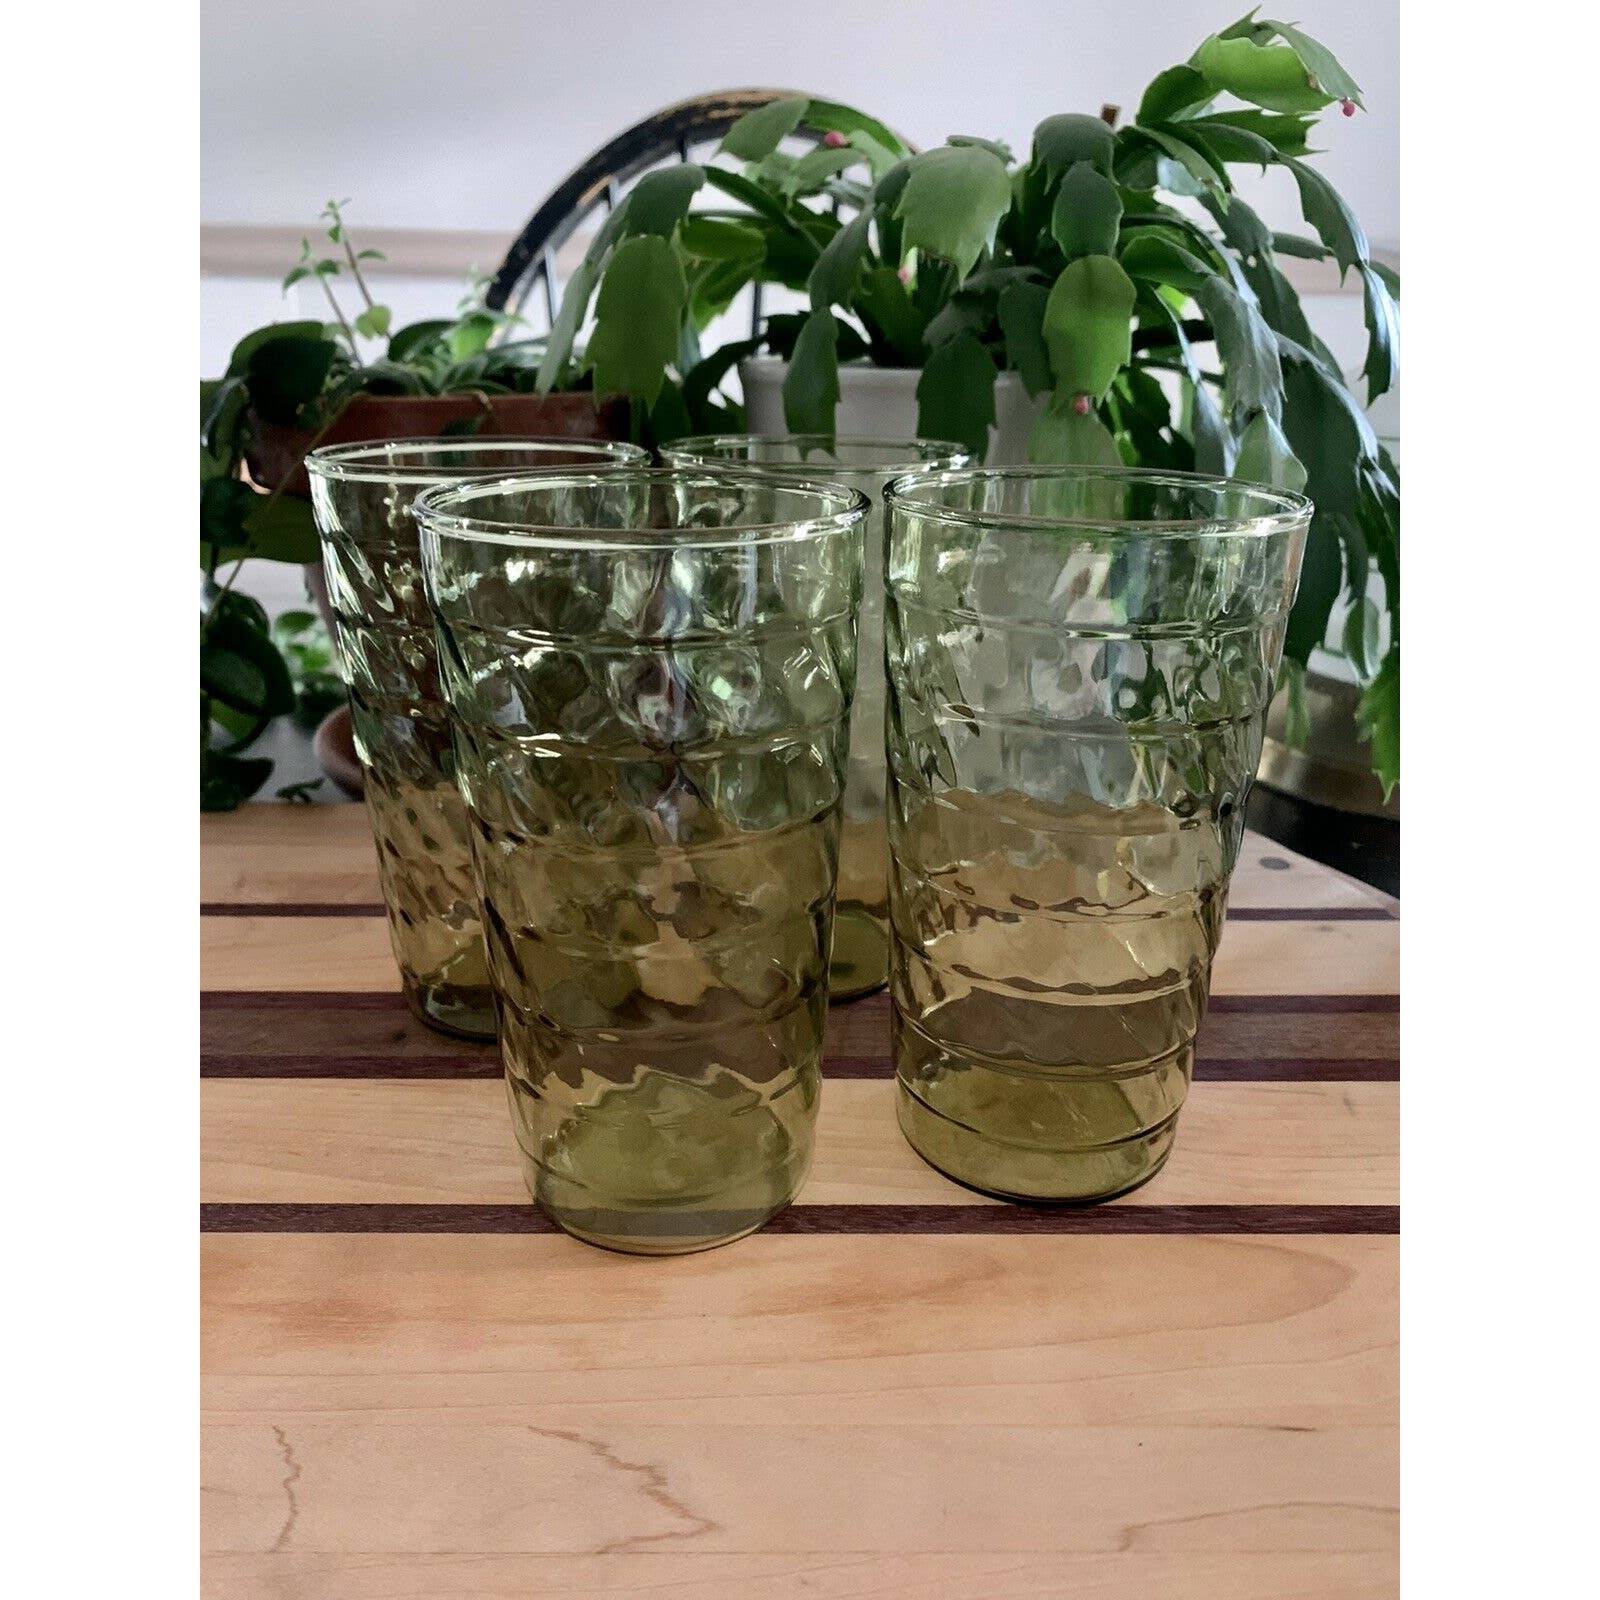 4 Vintage Hand Painted Olive Green Decorative Glass Cups (6.5” H)